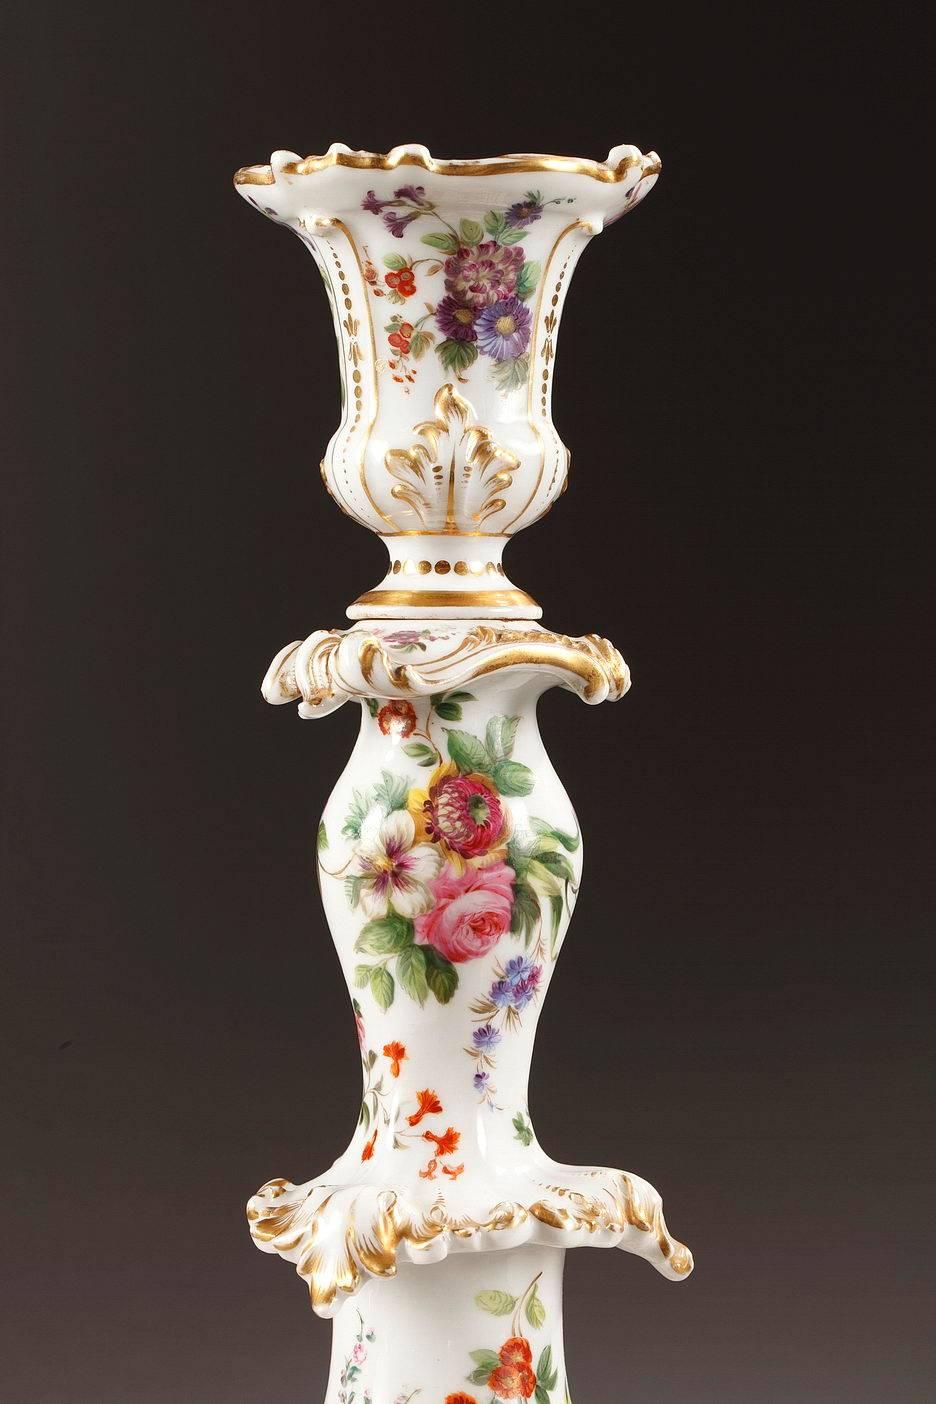 Pair of porcelain candlesticks by Jacob Petit, decorated with enameled bouquets of flowers on a white background. It is highlighted with gilded scrollwork, acanthus leaves and small points. Each candlestick rests on three feet with scrolling foliage